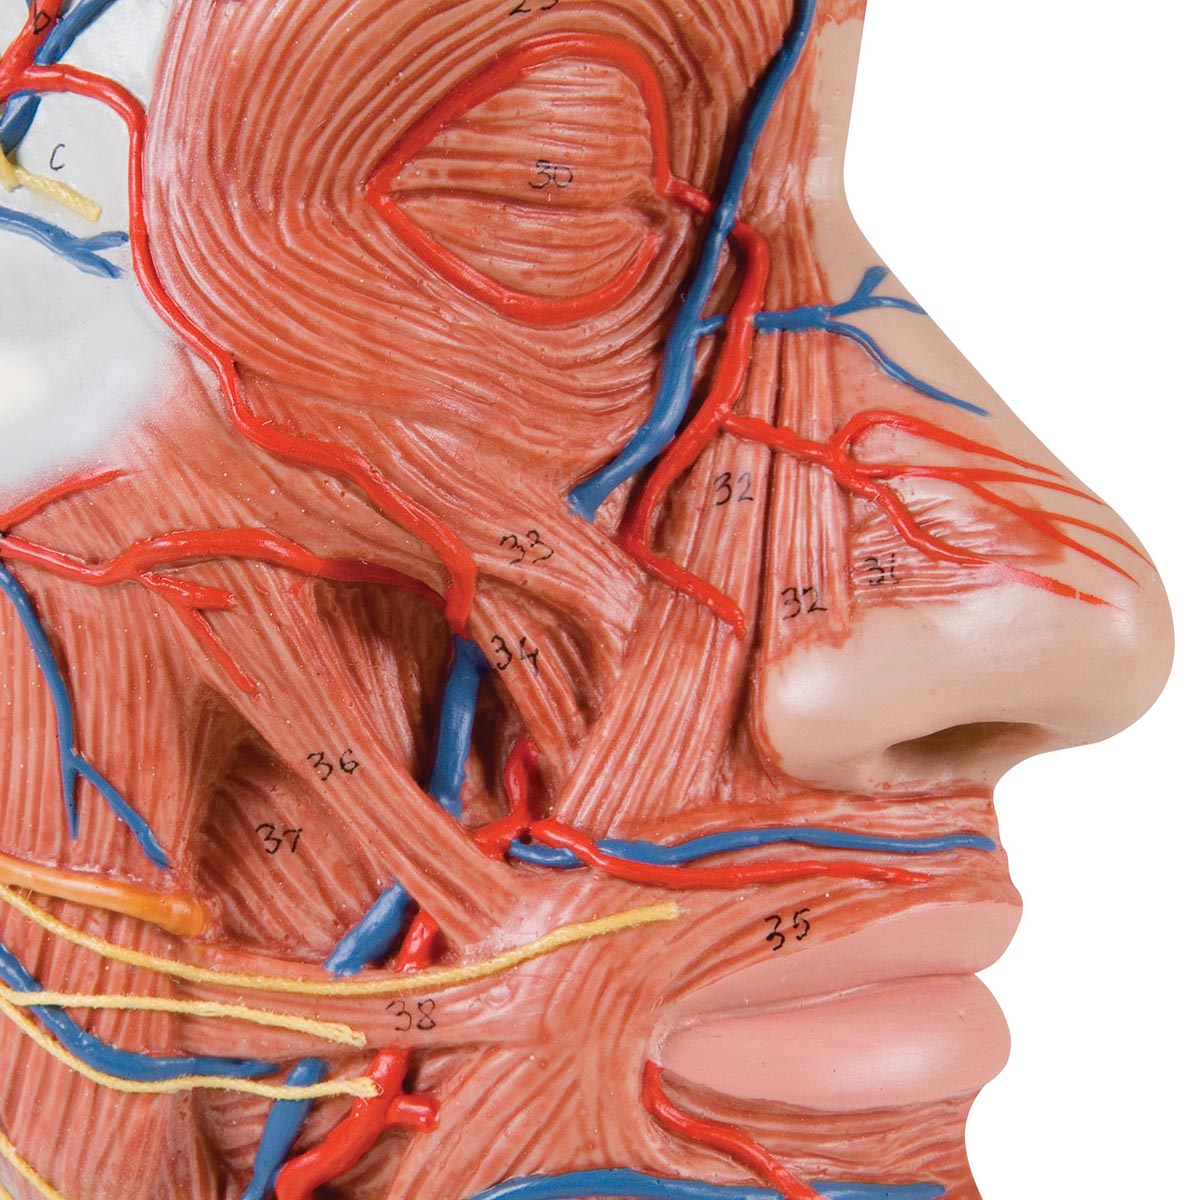 Complete and detailed muscle model of the head and neck which is cut in half